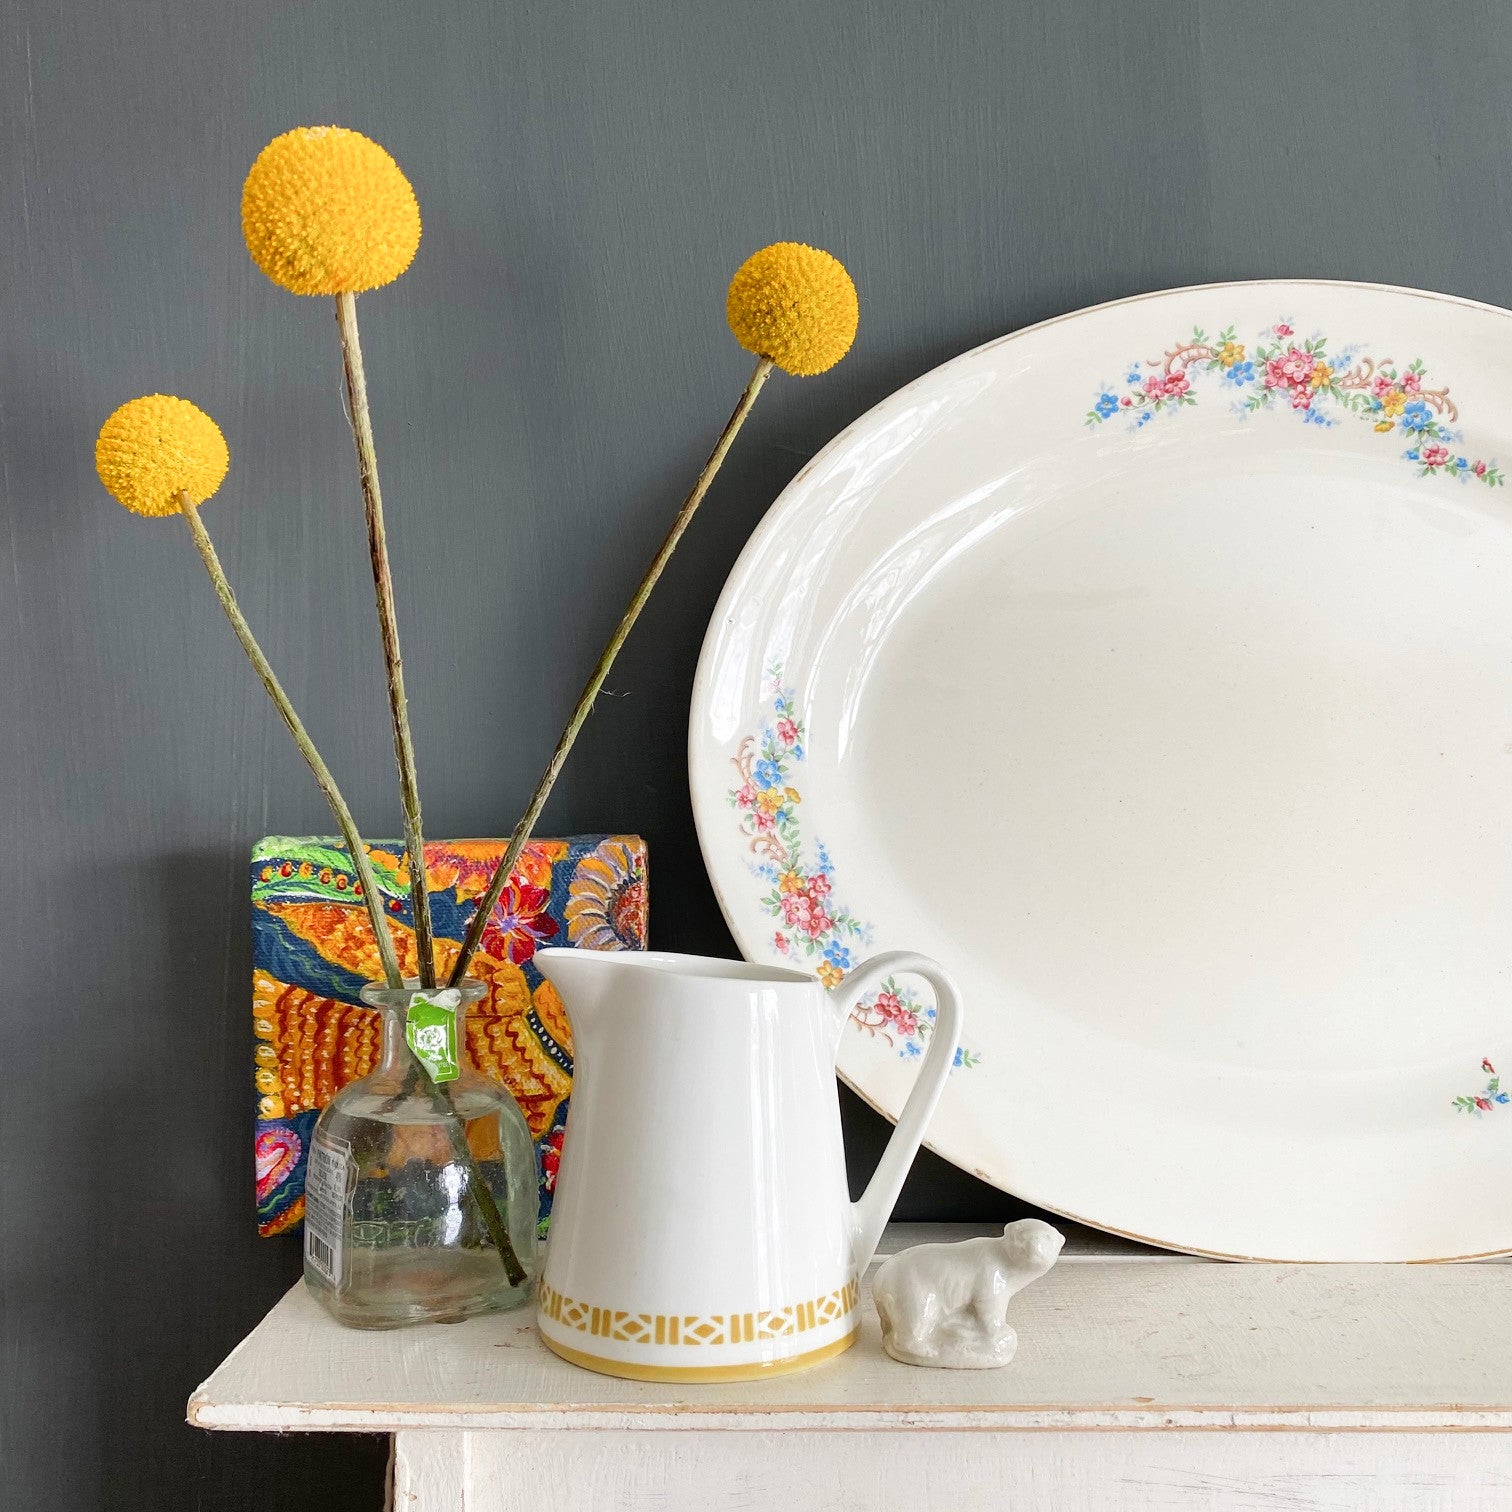 Vintage Floral Platter with Blue, Pink and Yellow Flowers